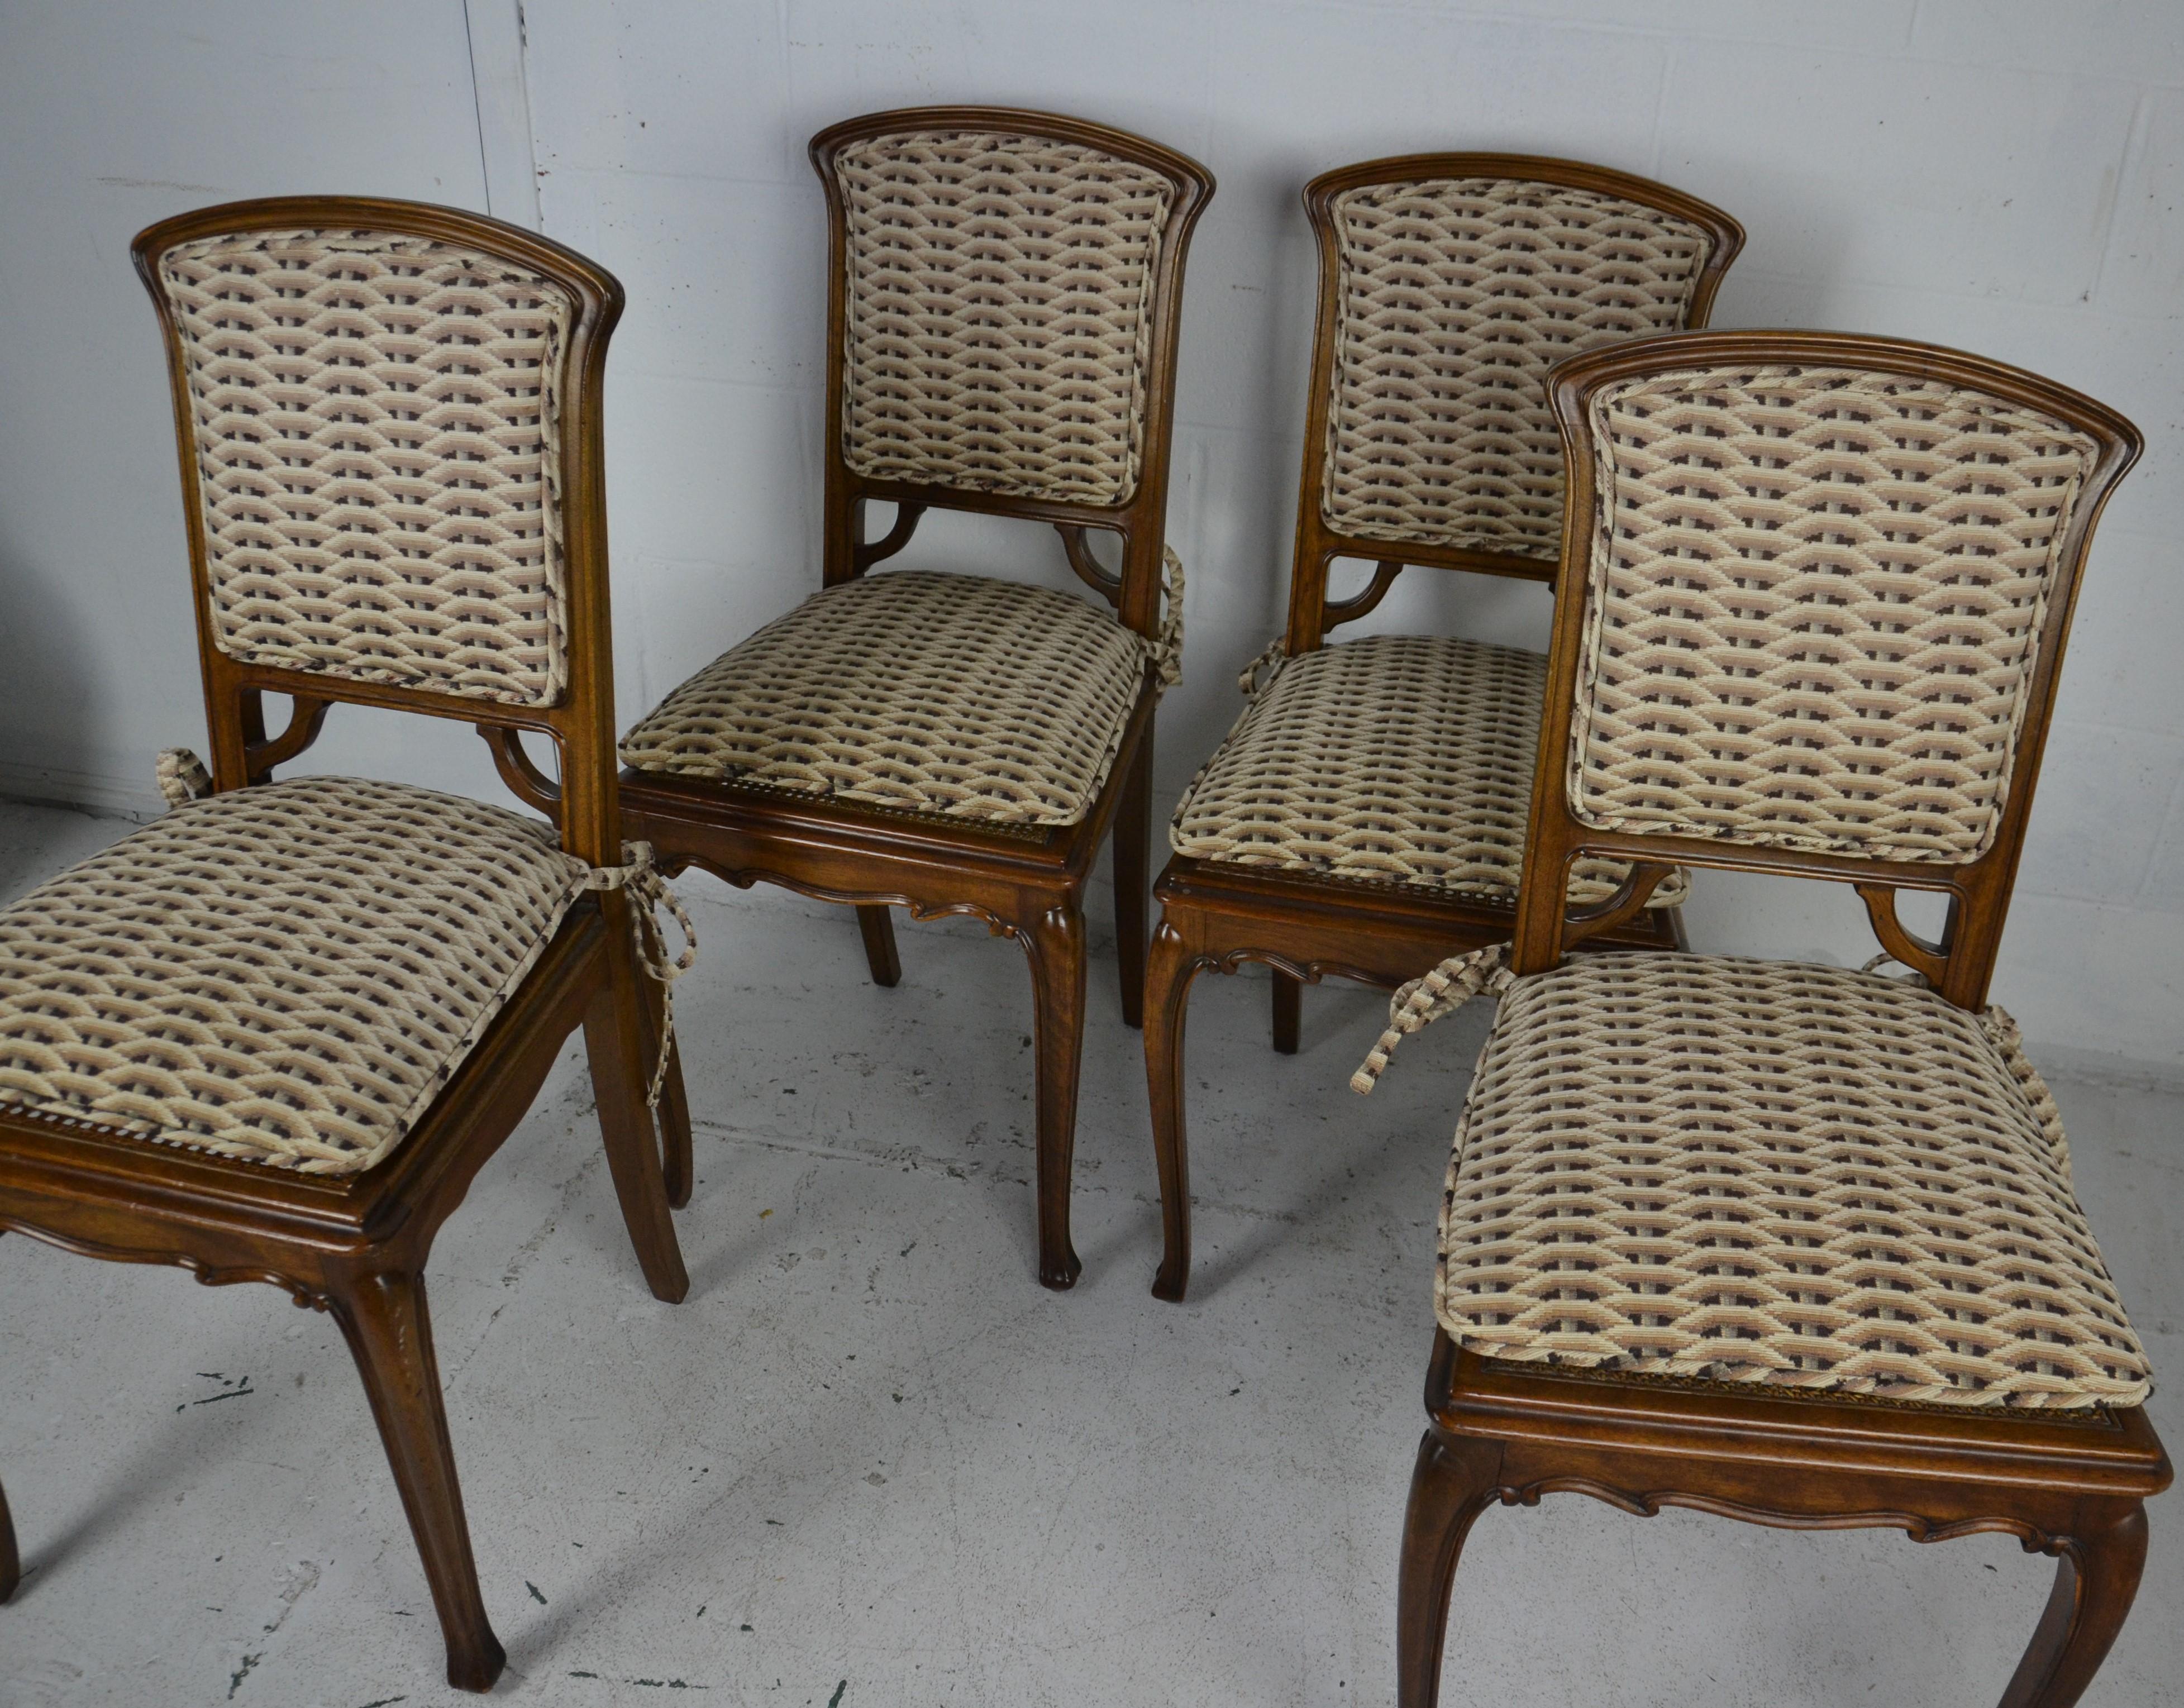 An unusual set of 4 chairs in mahogany with finely carved legs and front rail. The backs in the Art Nouveau style.